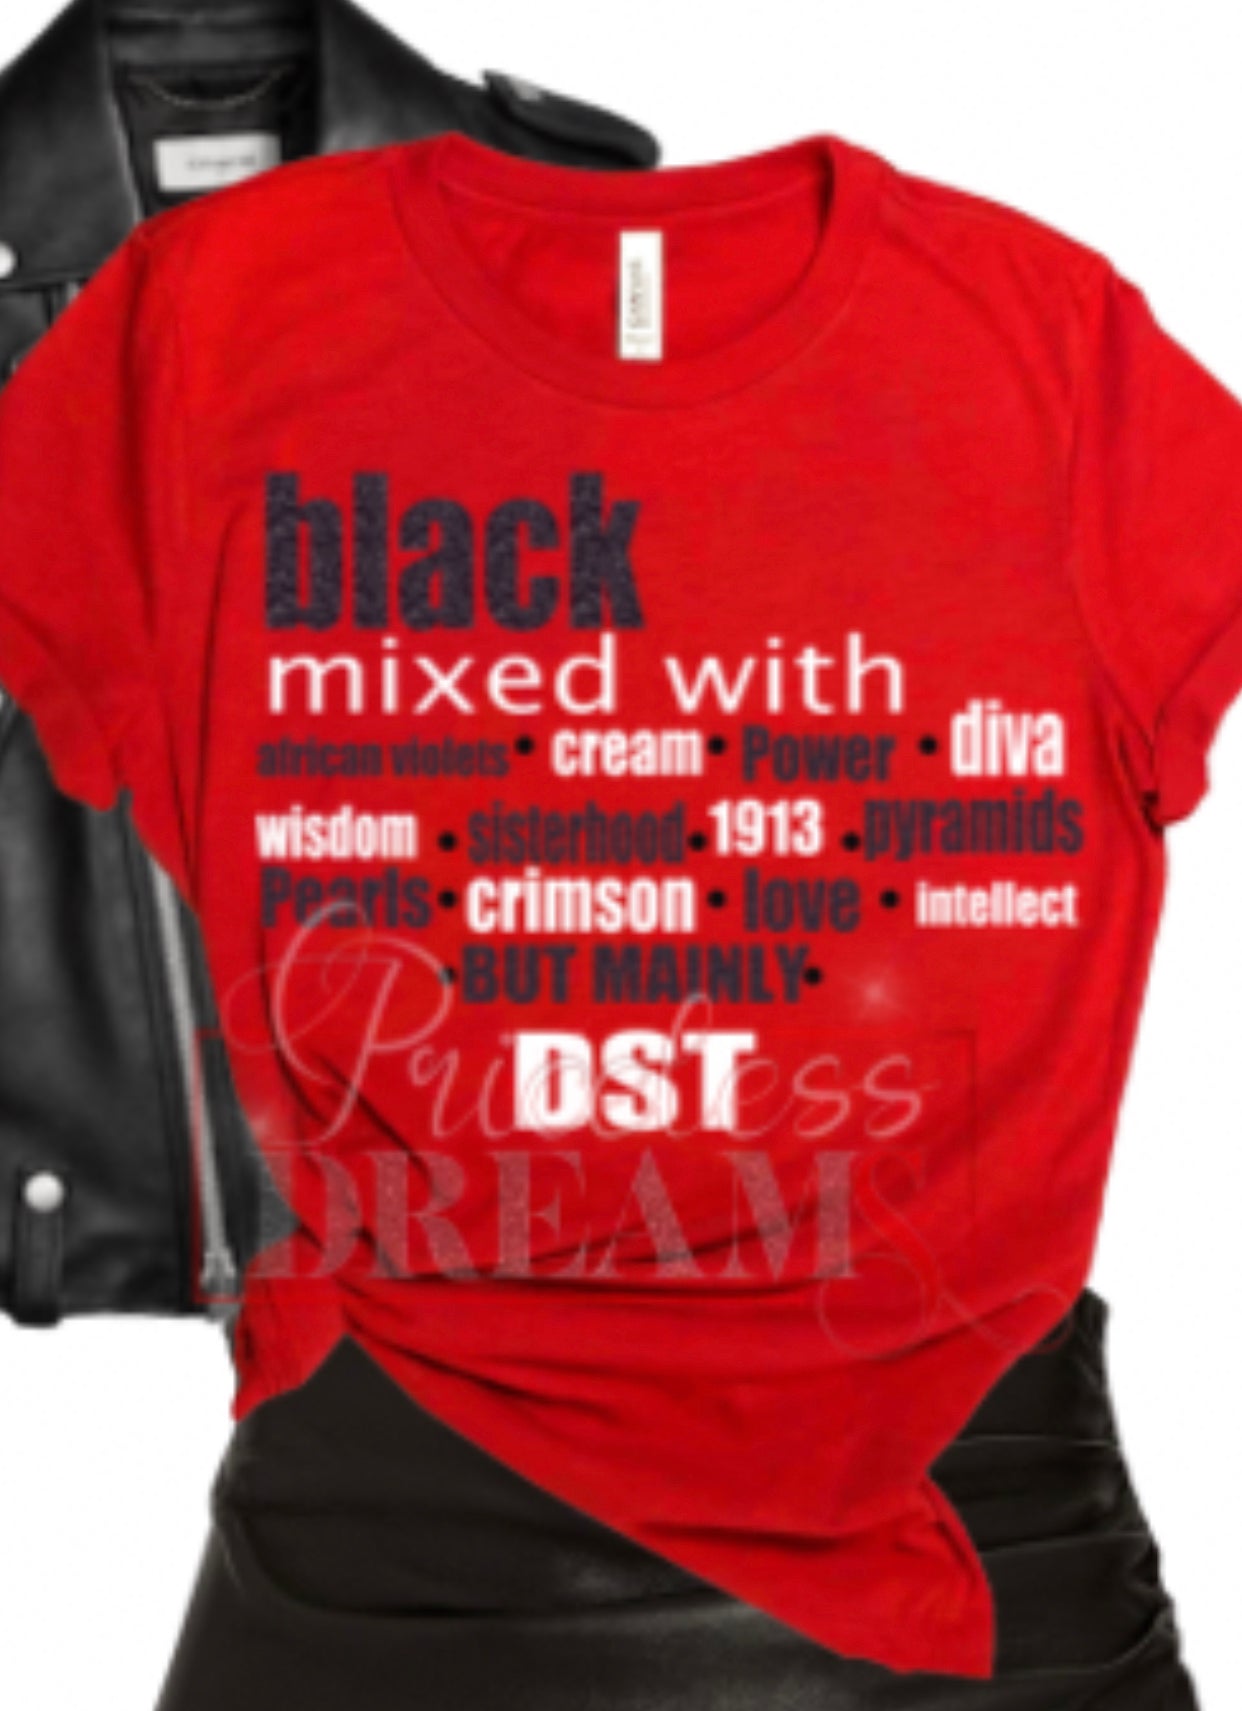 Black…but mainly DST